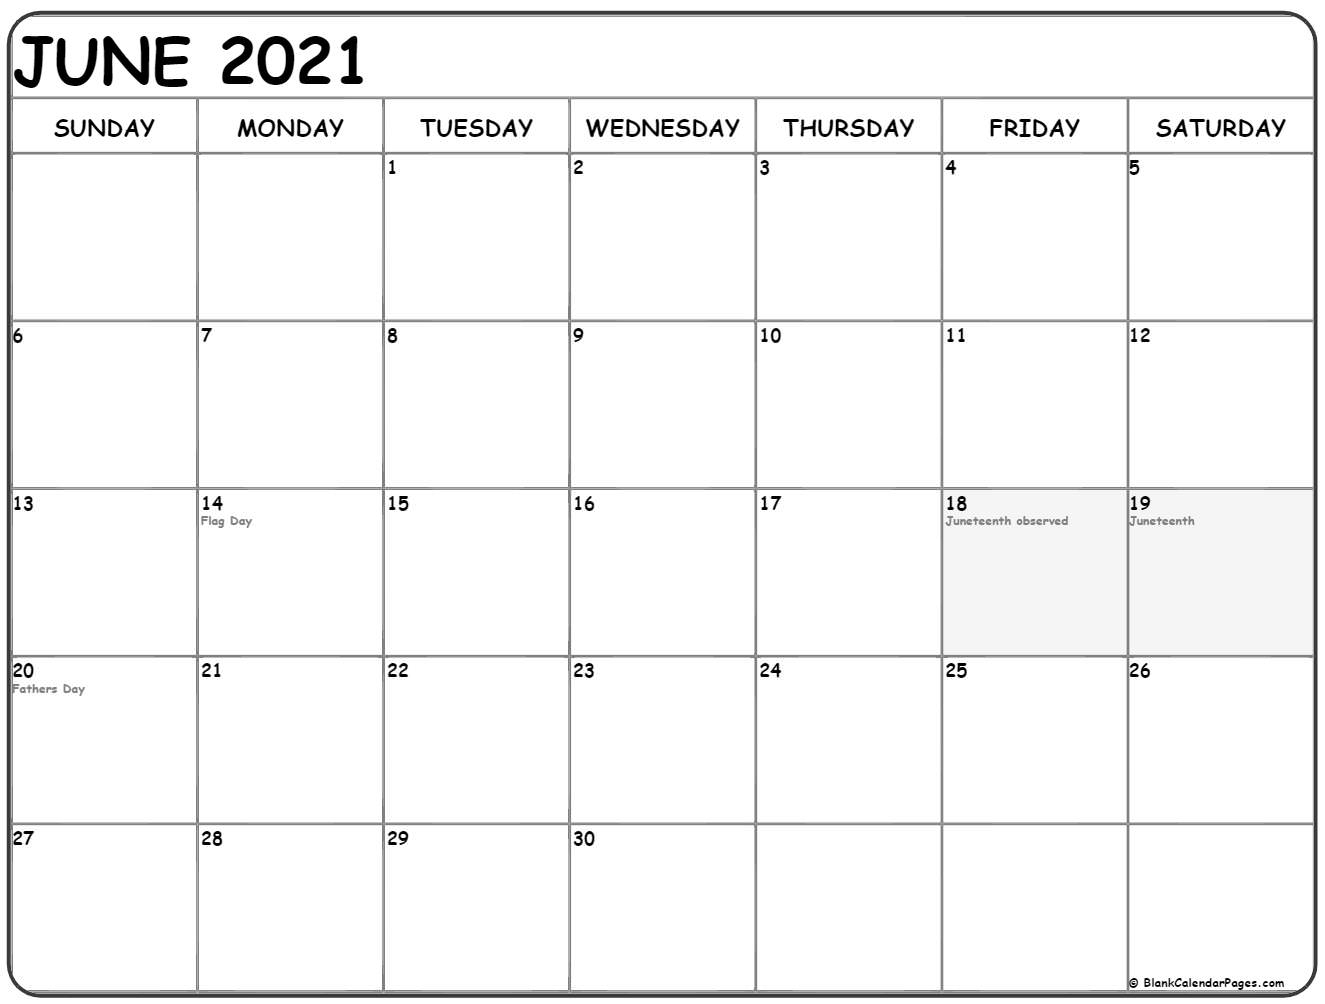 Collection Of June 2021 Calendars With Holidays